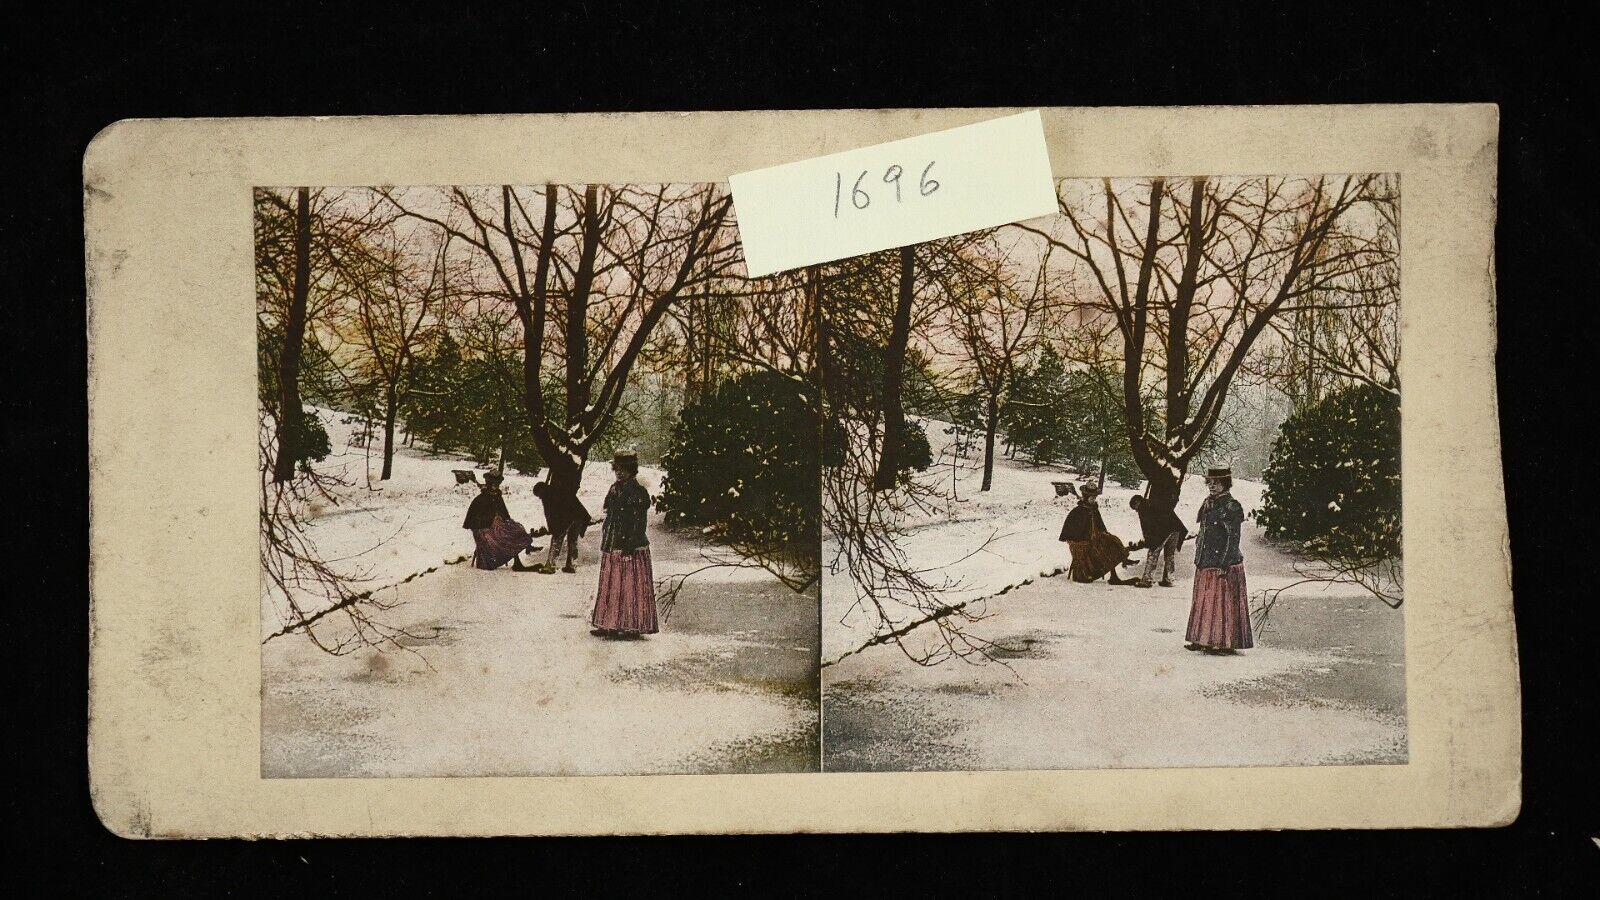 EARLY unusual Stereoview hand colored people snow